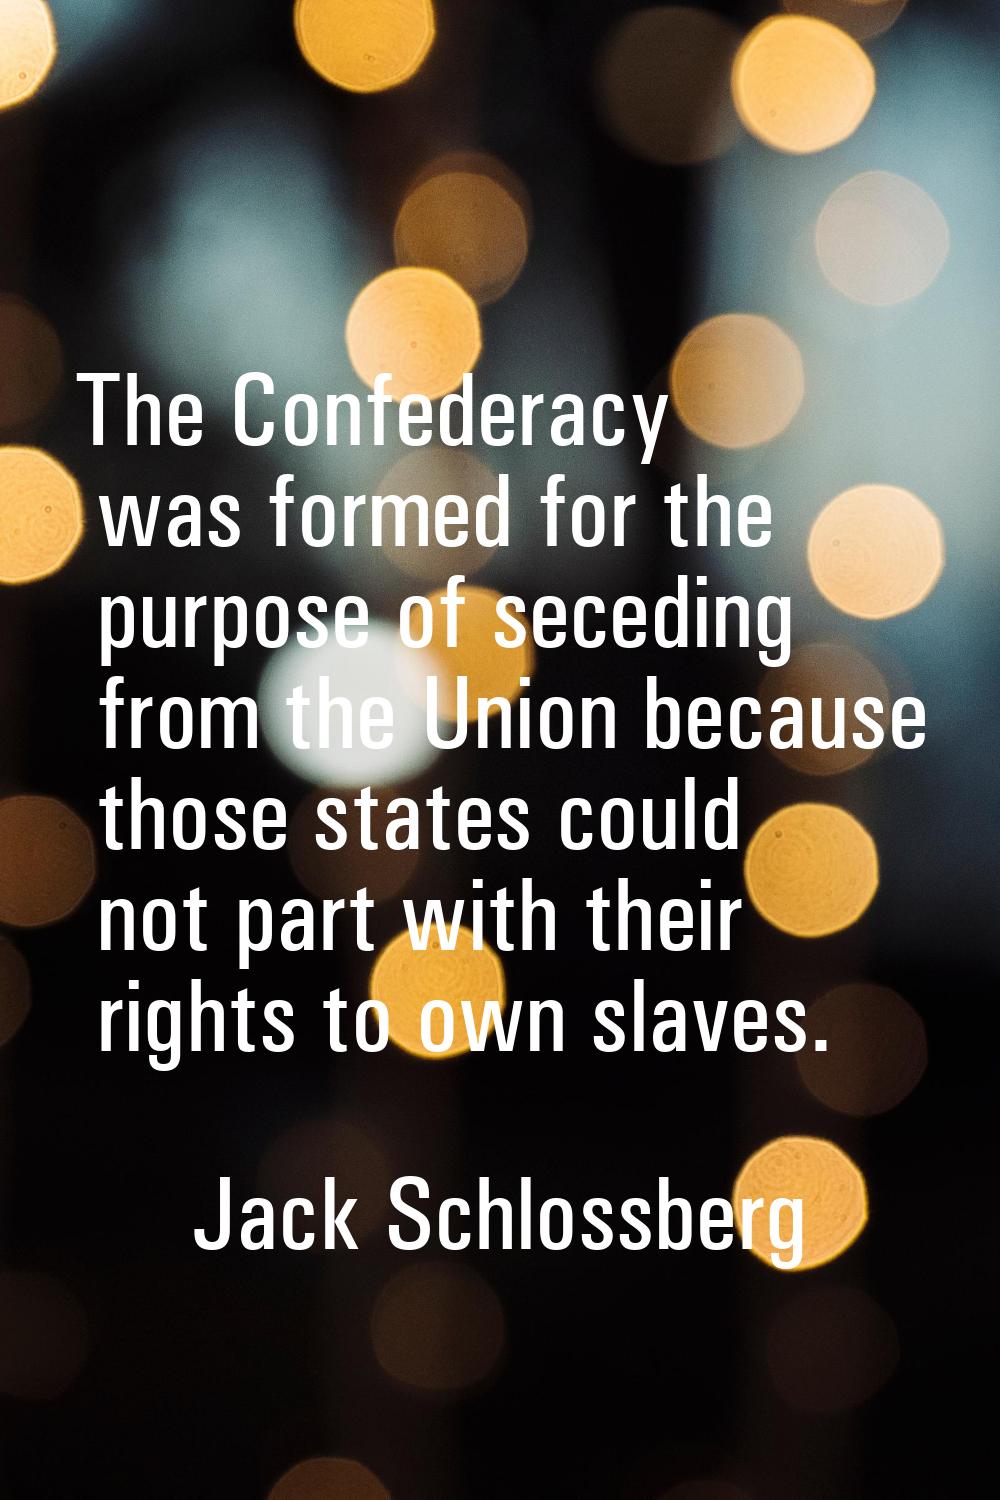 The Confederacy was formed for the purpose of seceding from the Union because those states could no